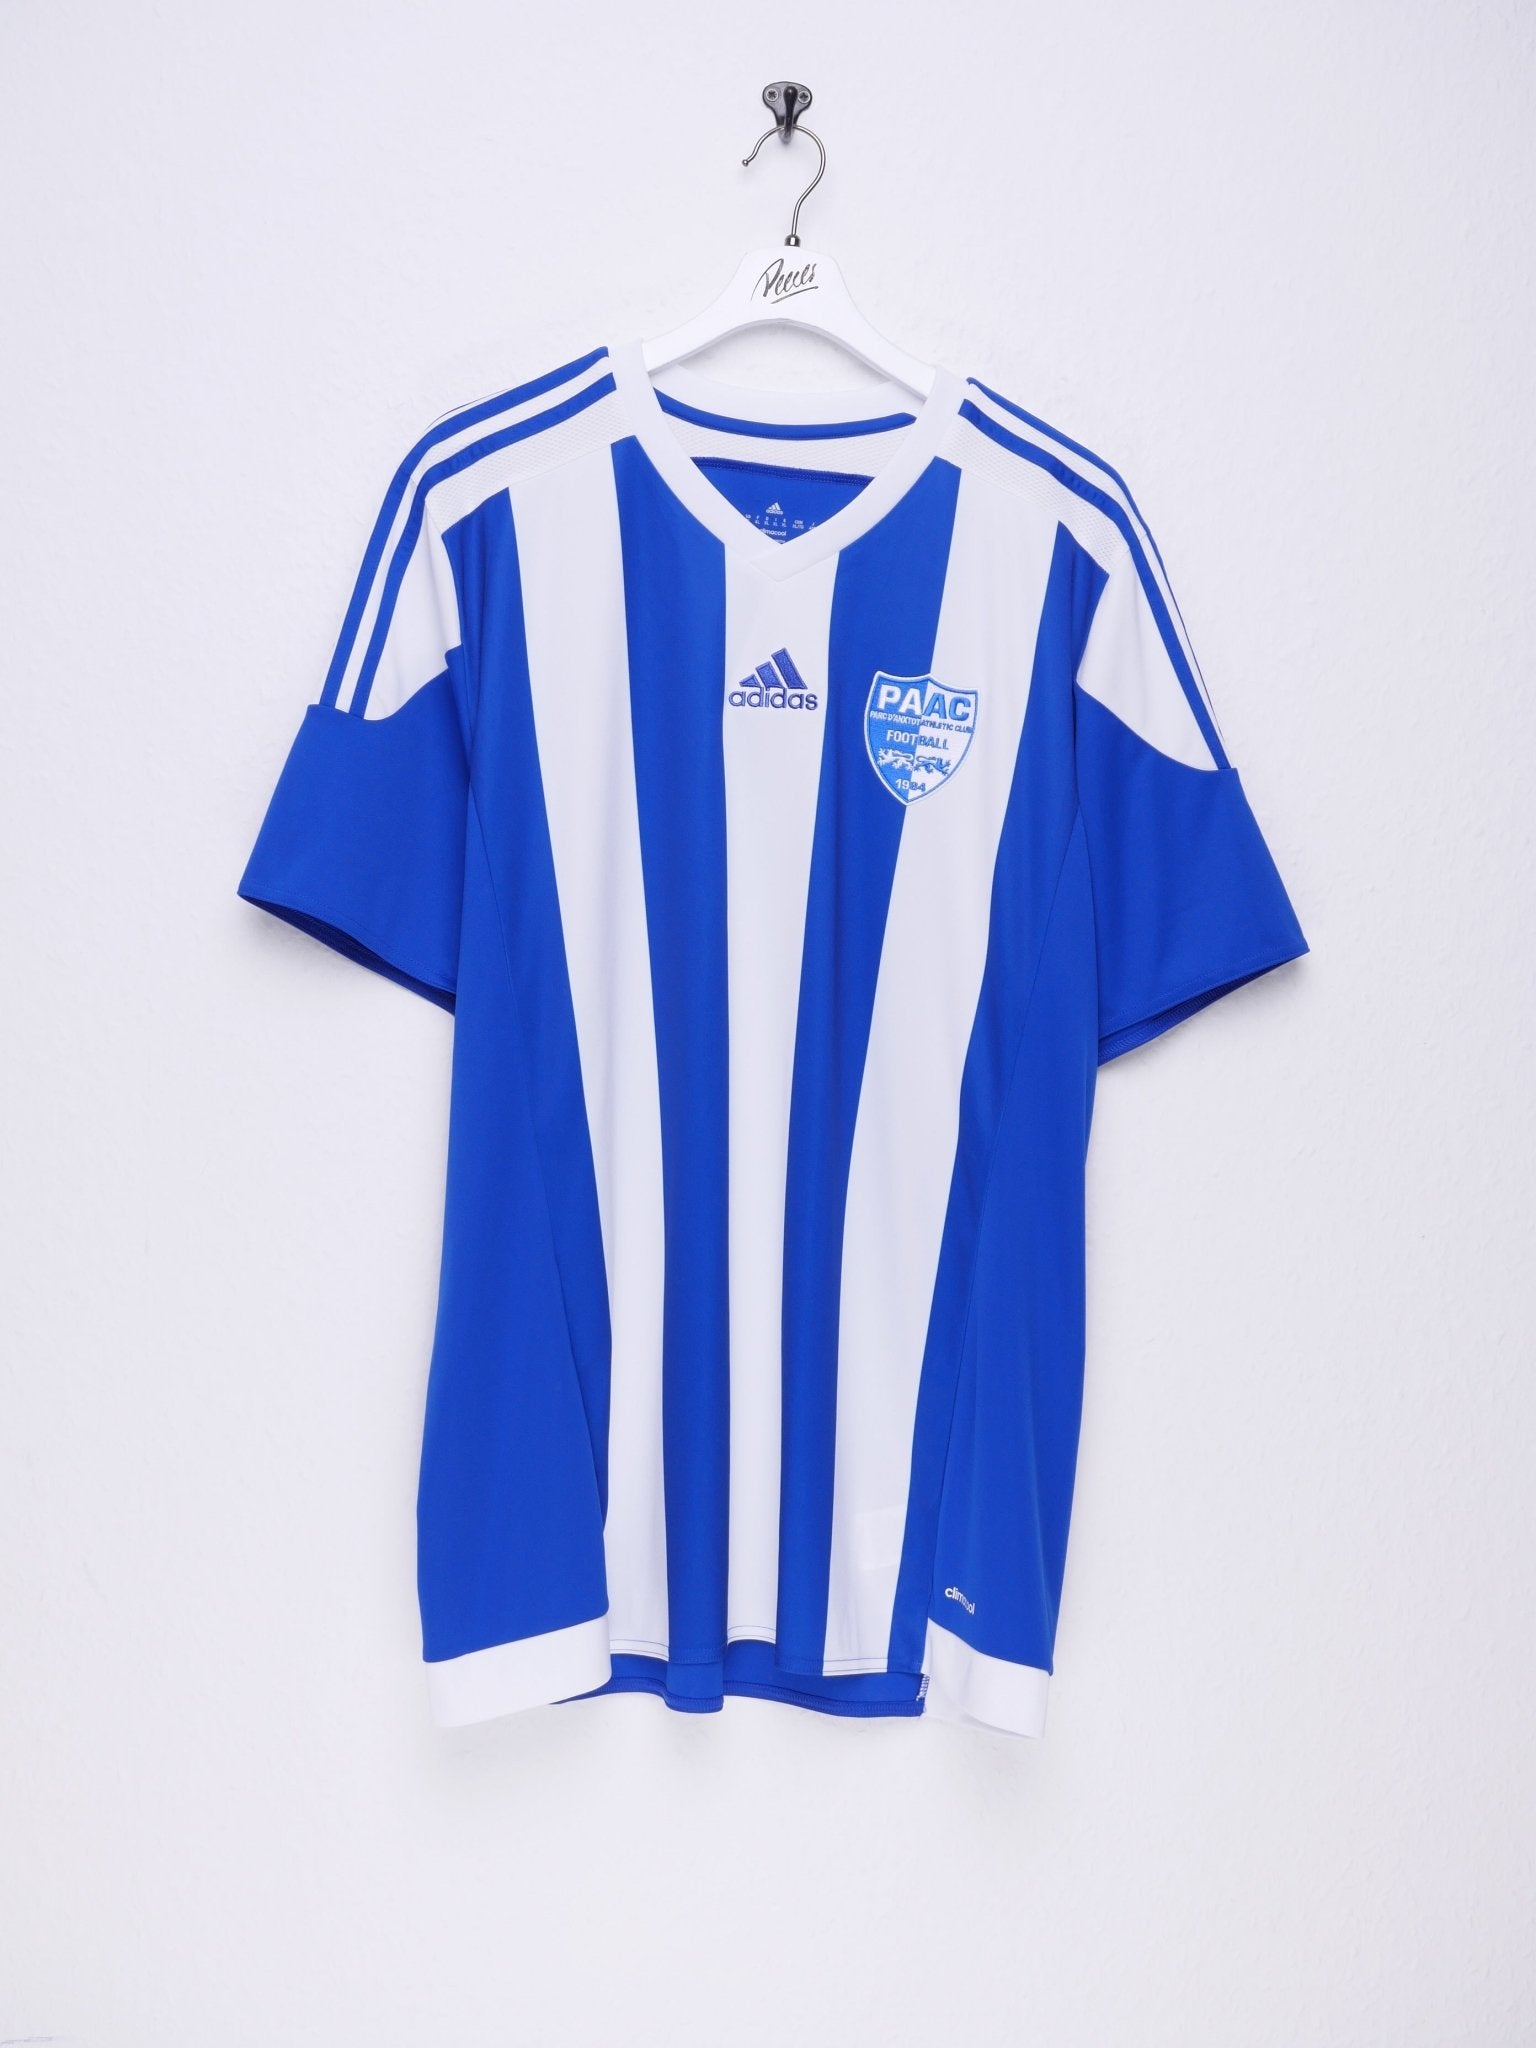 adidas embroidered Middle Logo striped Soccer Jersey Shirt - Peeces